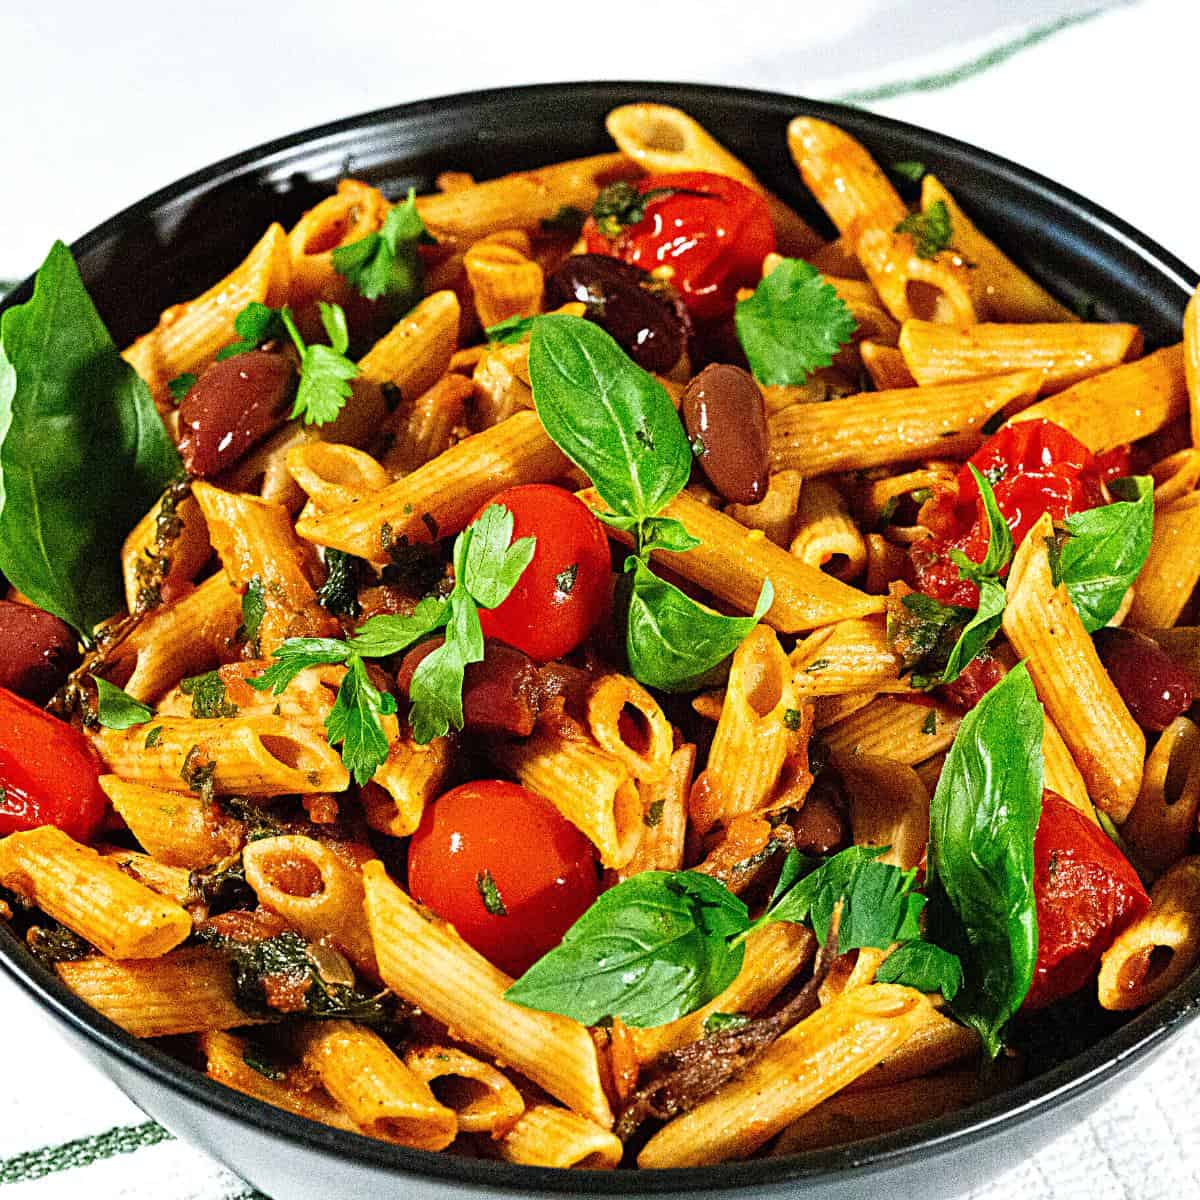 A bowl with pasta and cherry tomatoes.